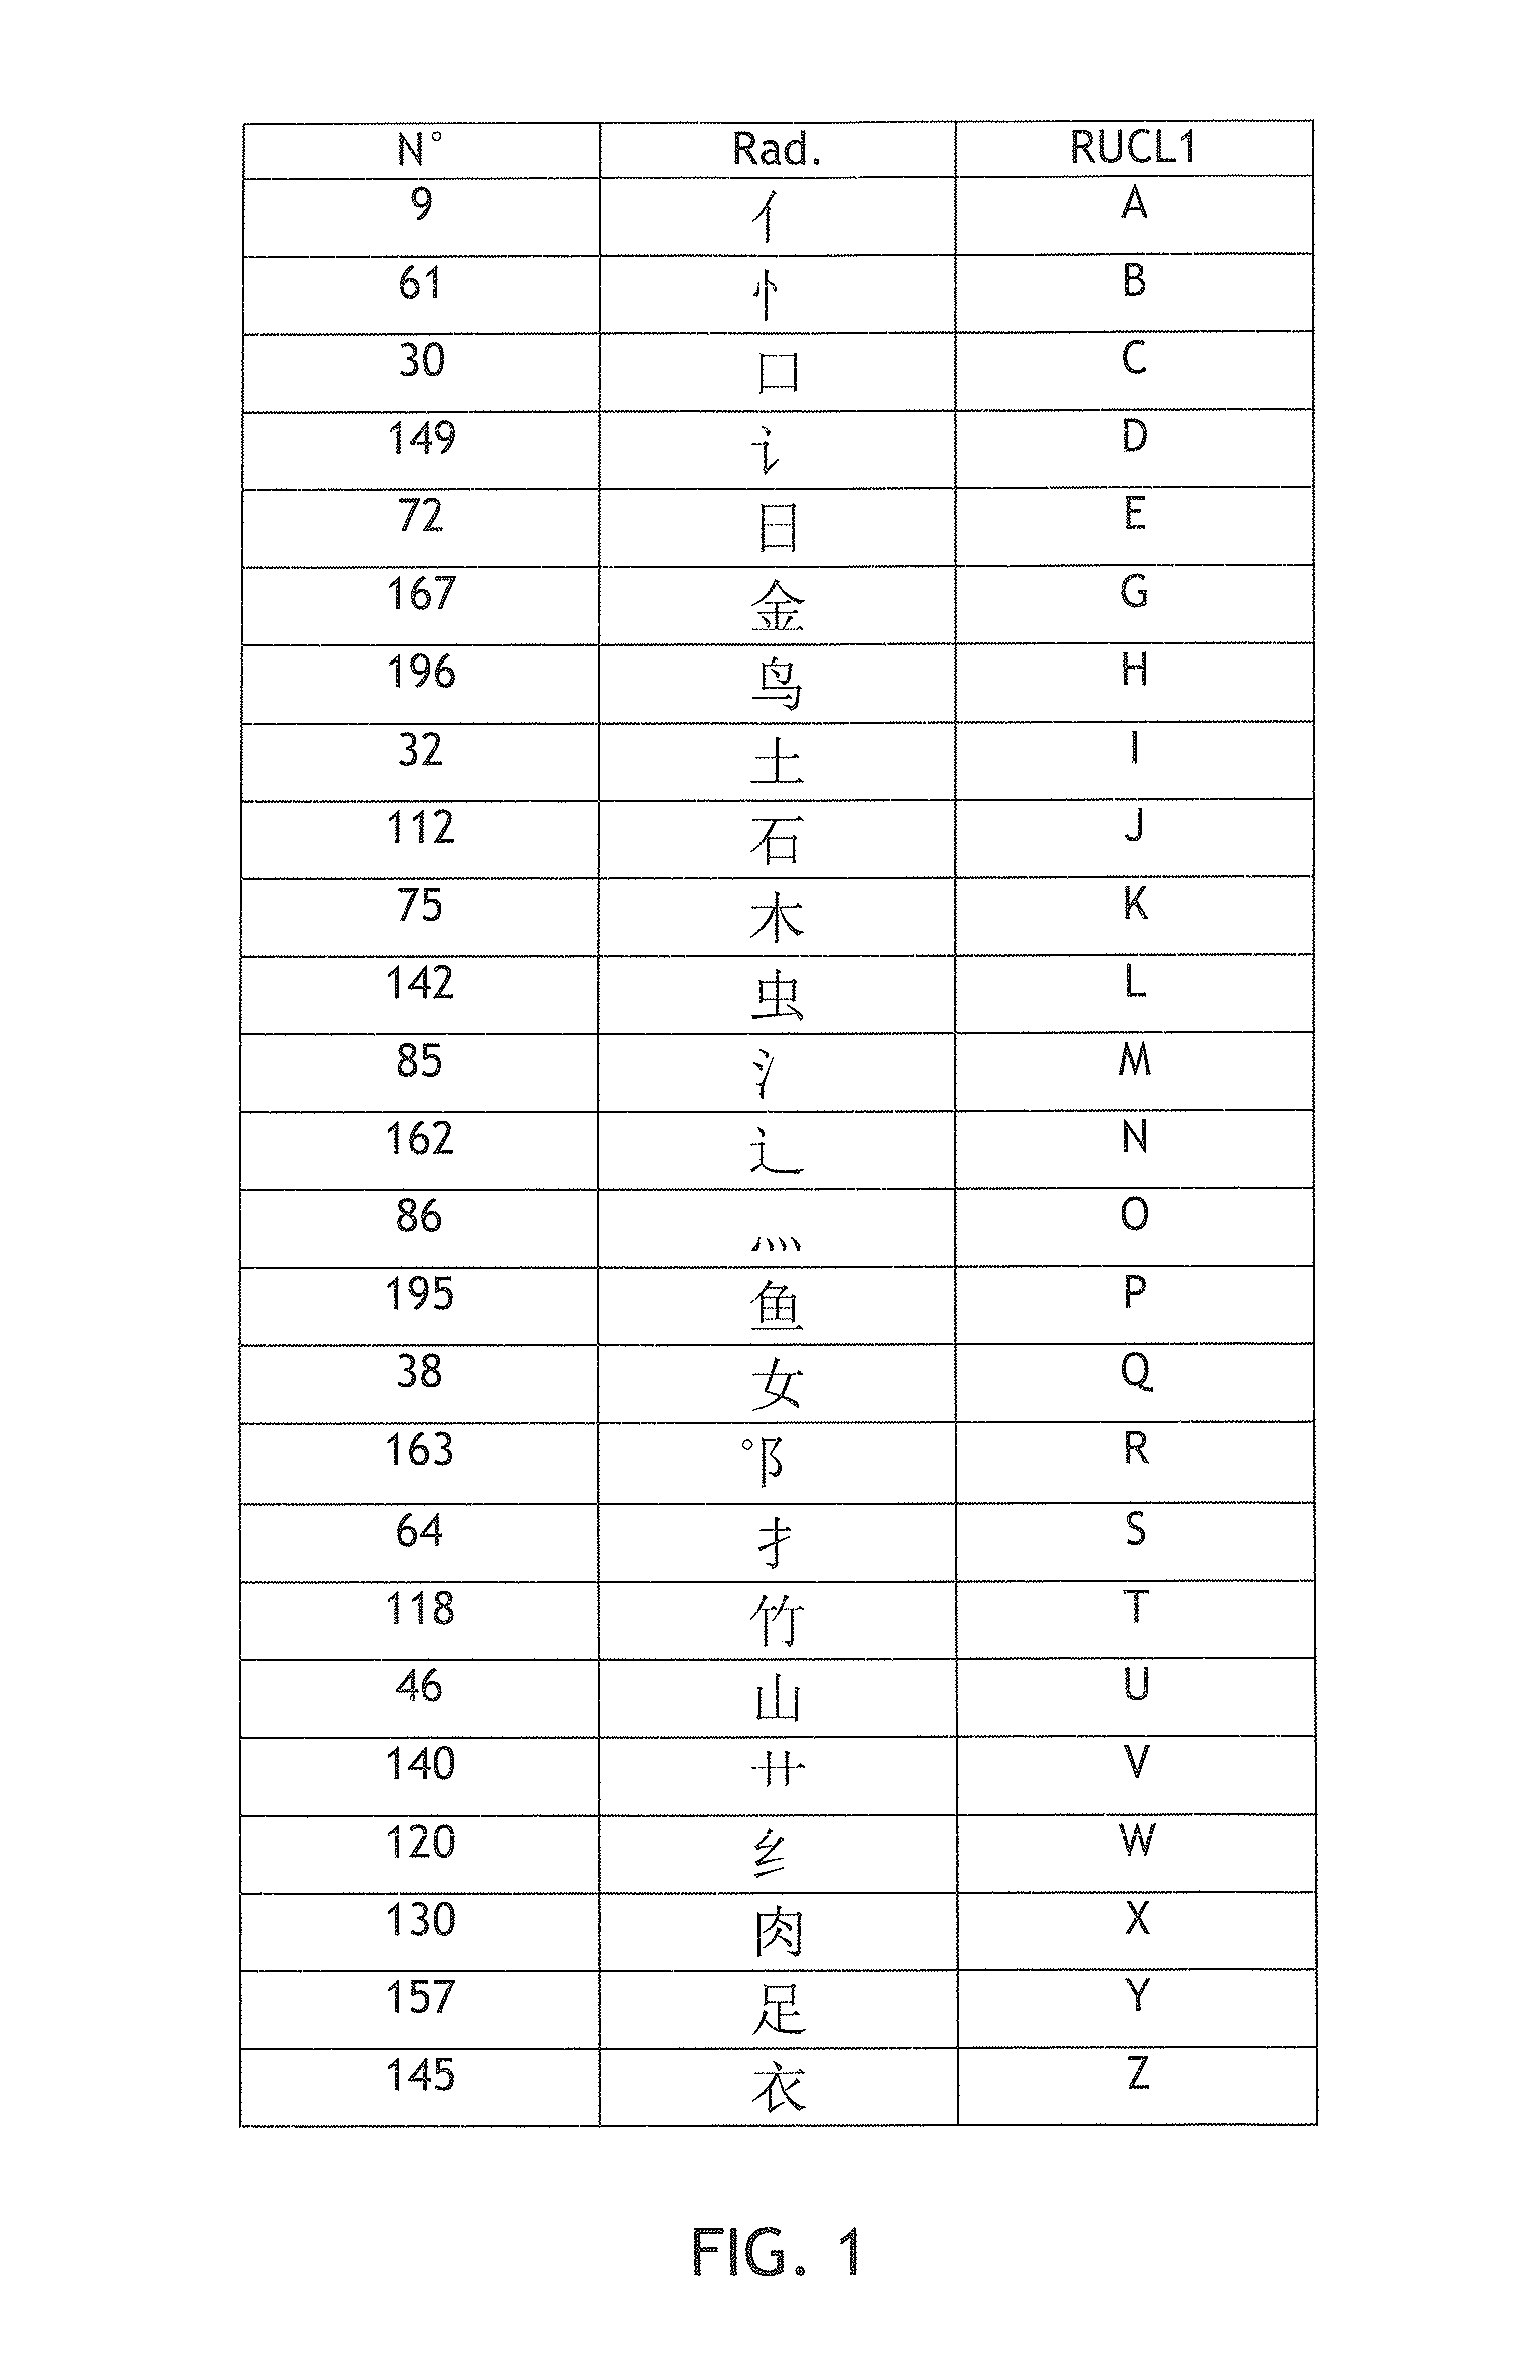 Transliterating methods between character-based and phonetic symbol-based writing systems